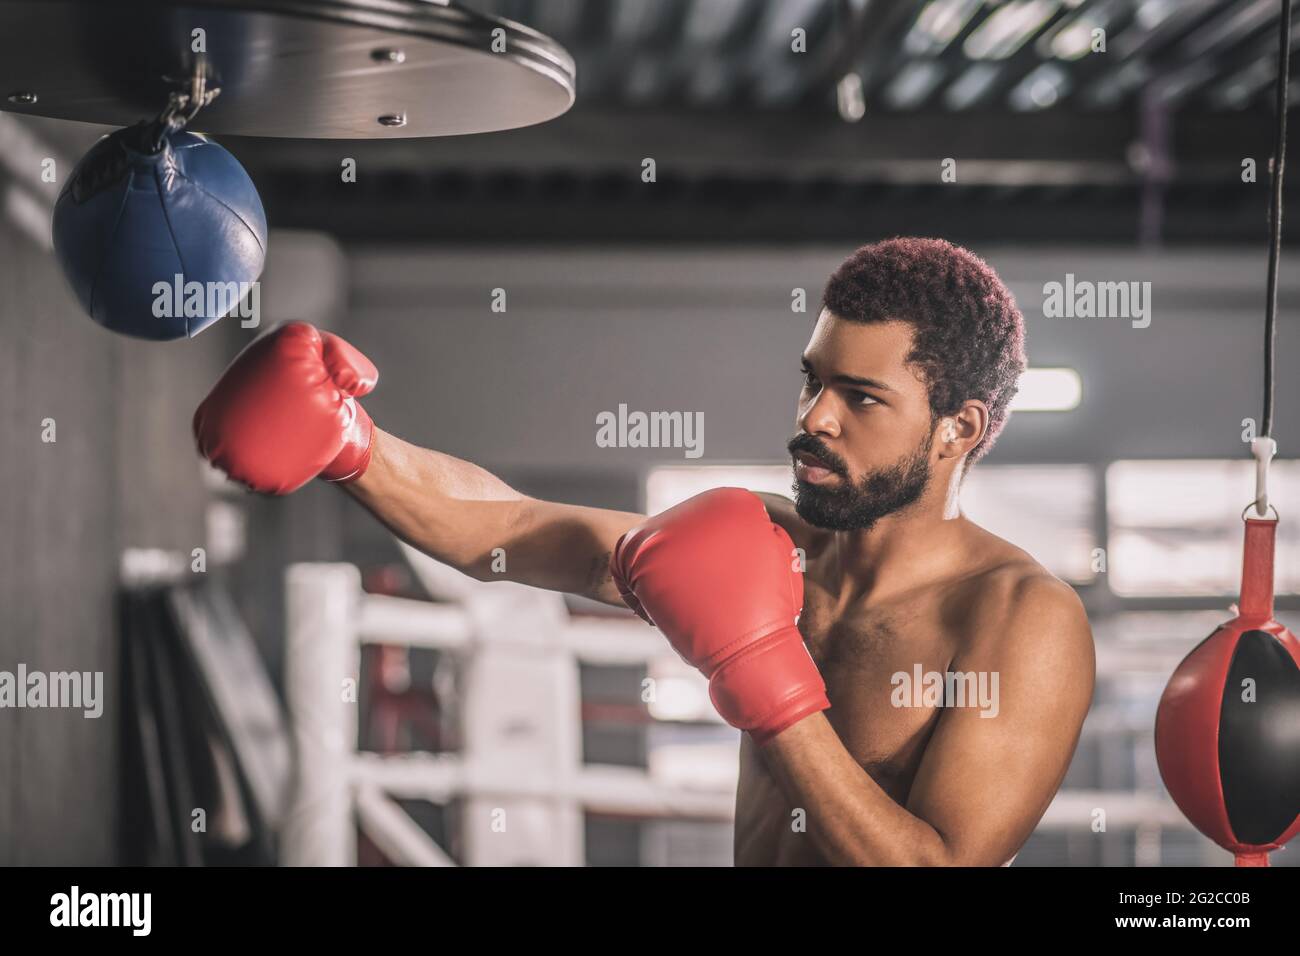 African american kickboxer having a workout in a gym and kicking the sandbag Stock Photo